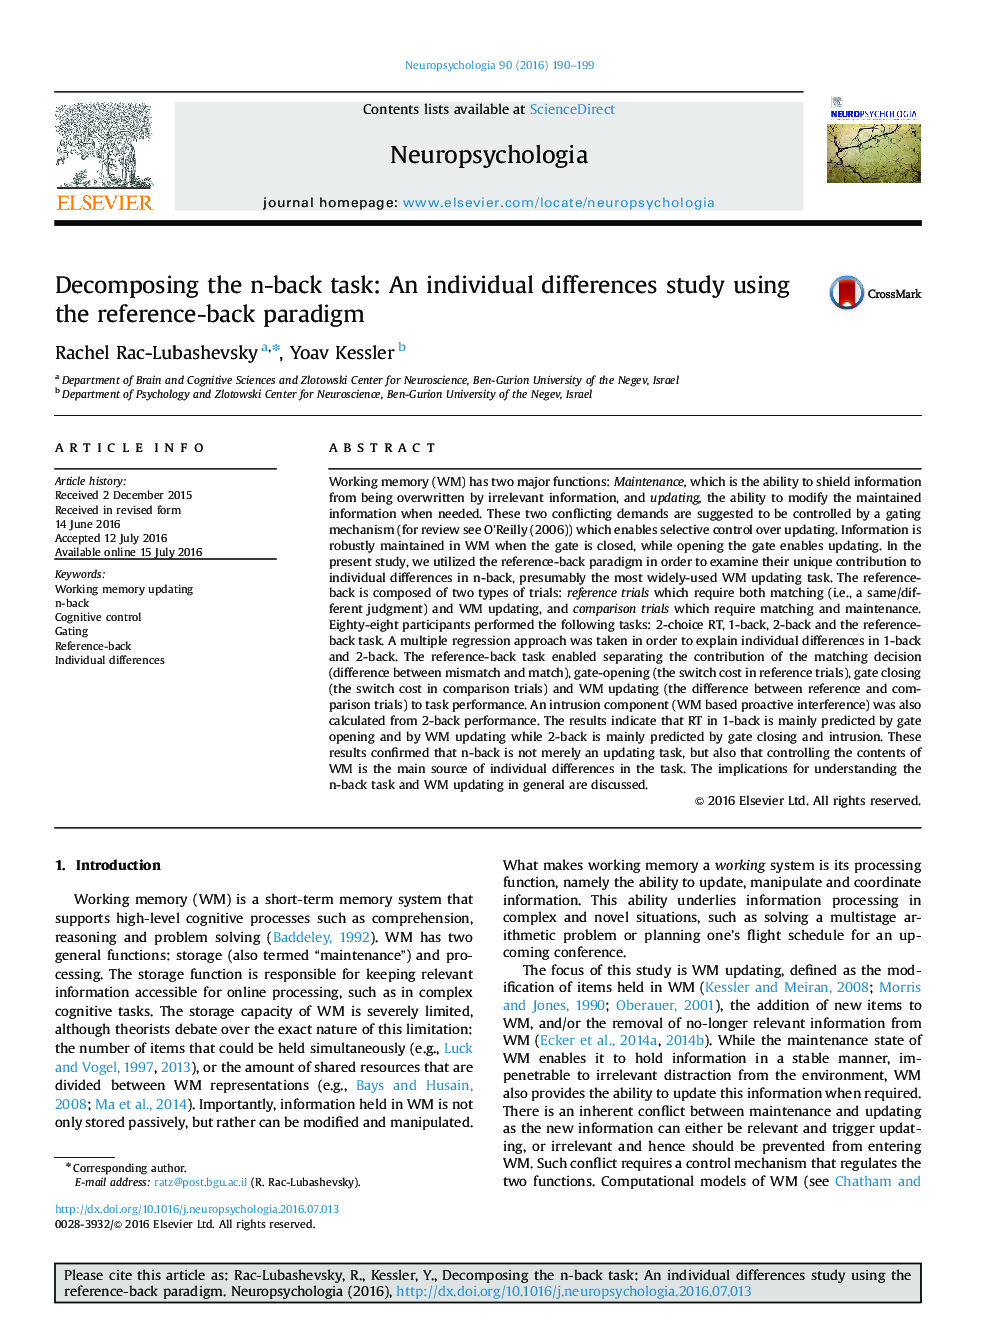 Decomposing the n-back task: An individual differences study using the reference-back paradigm